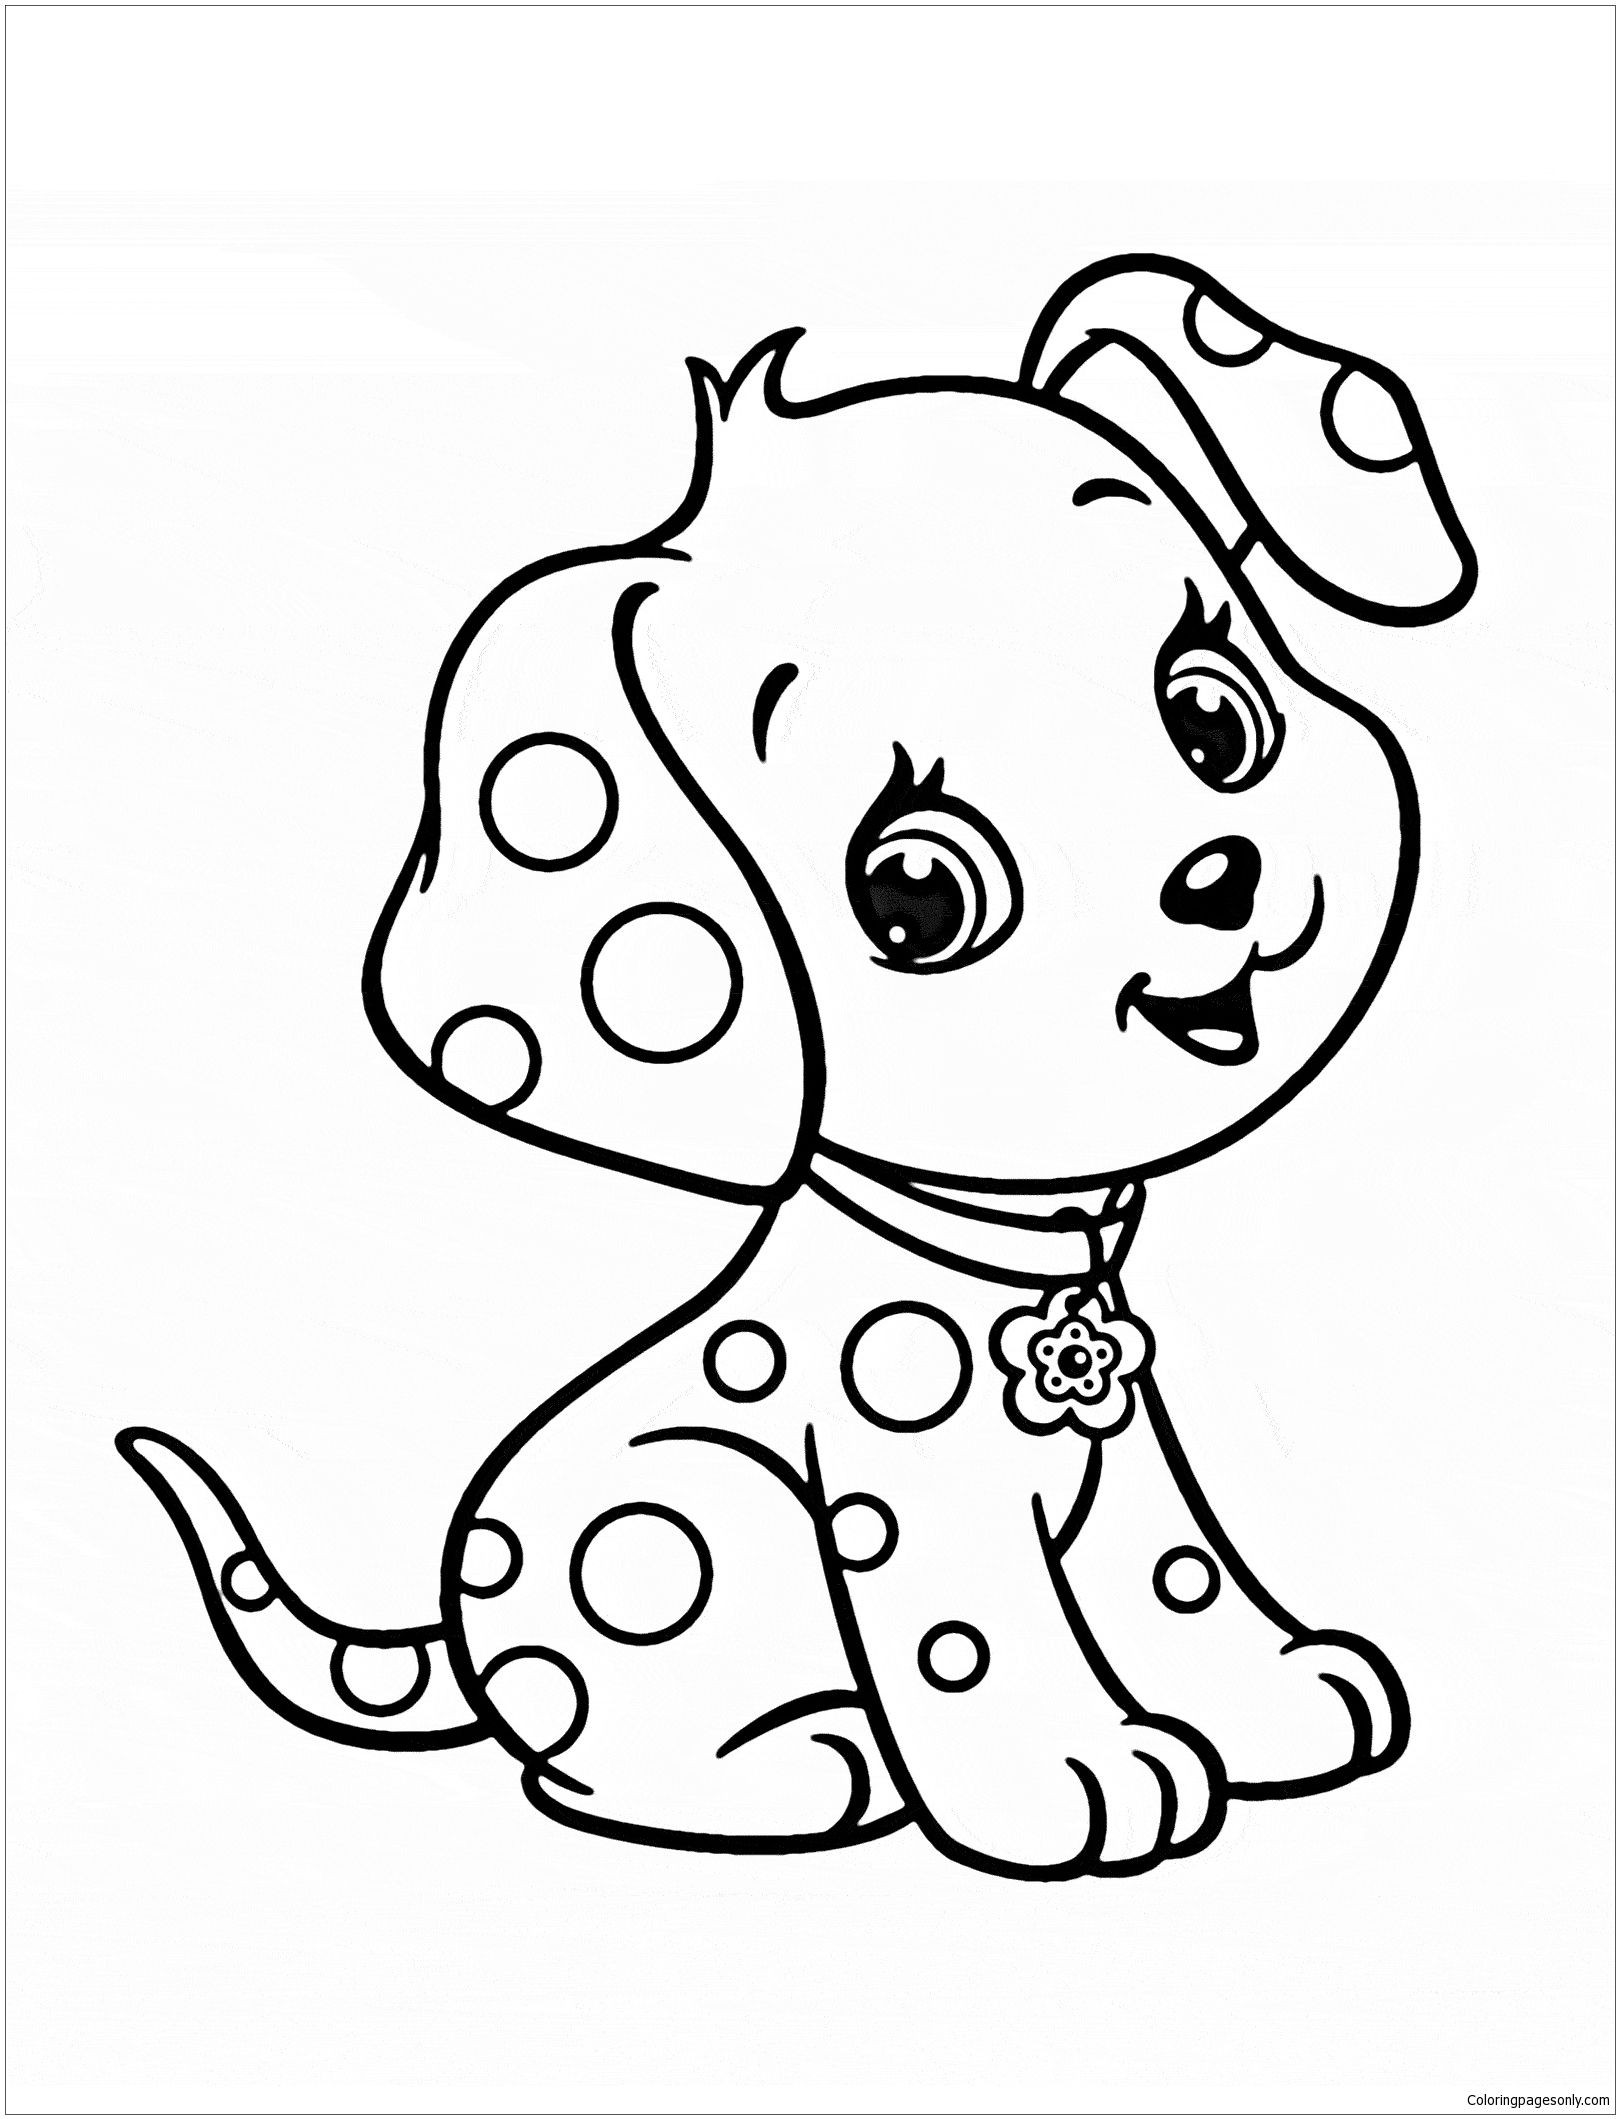 Cute Animal Coloring Pages For Girls
 Cute Puppy 5 Coloring Page